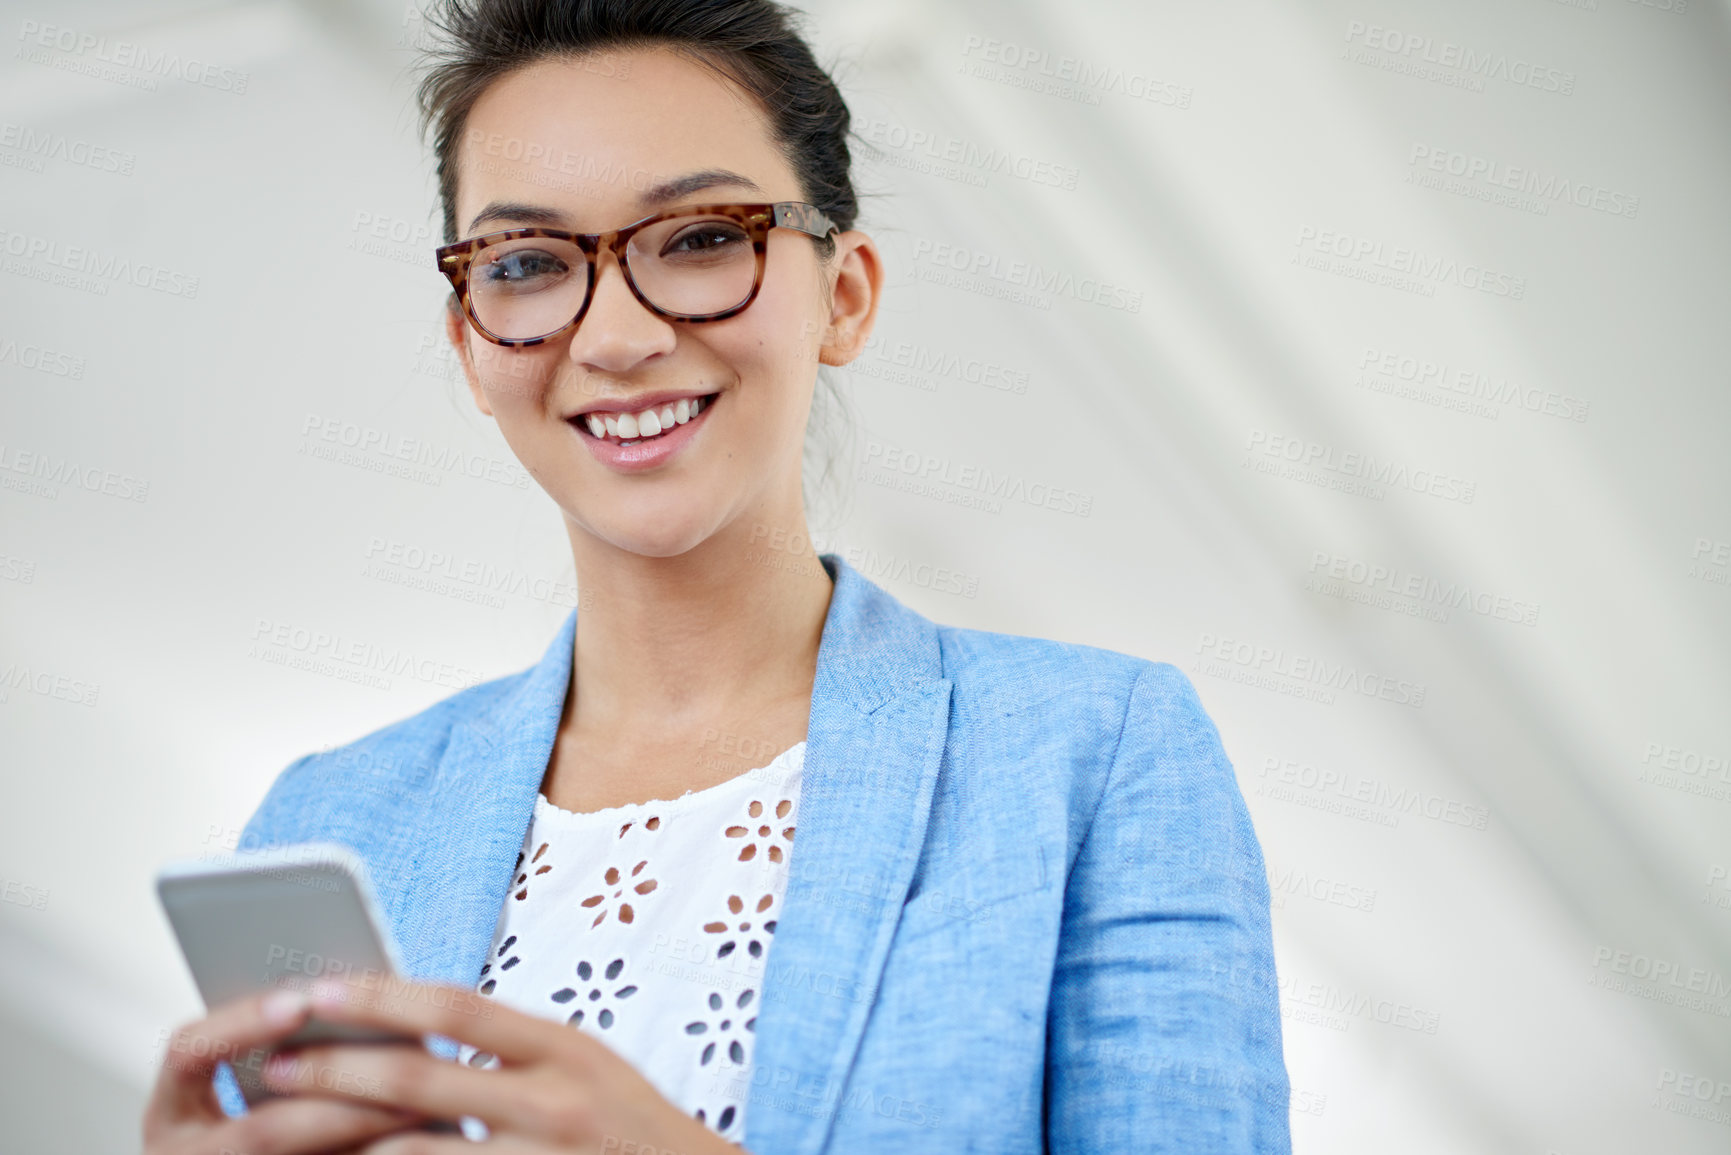 Buy stock photo Shot of an attractive young woman using a cellphone in an office